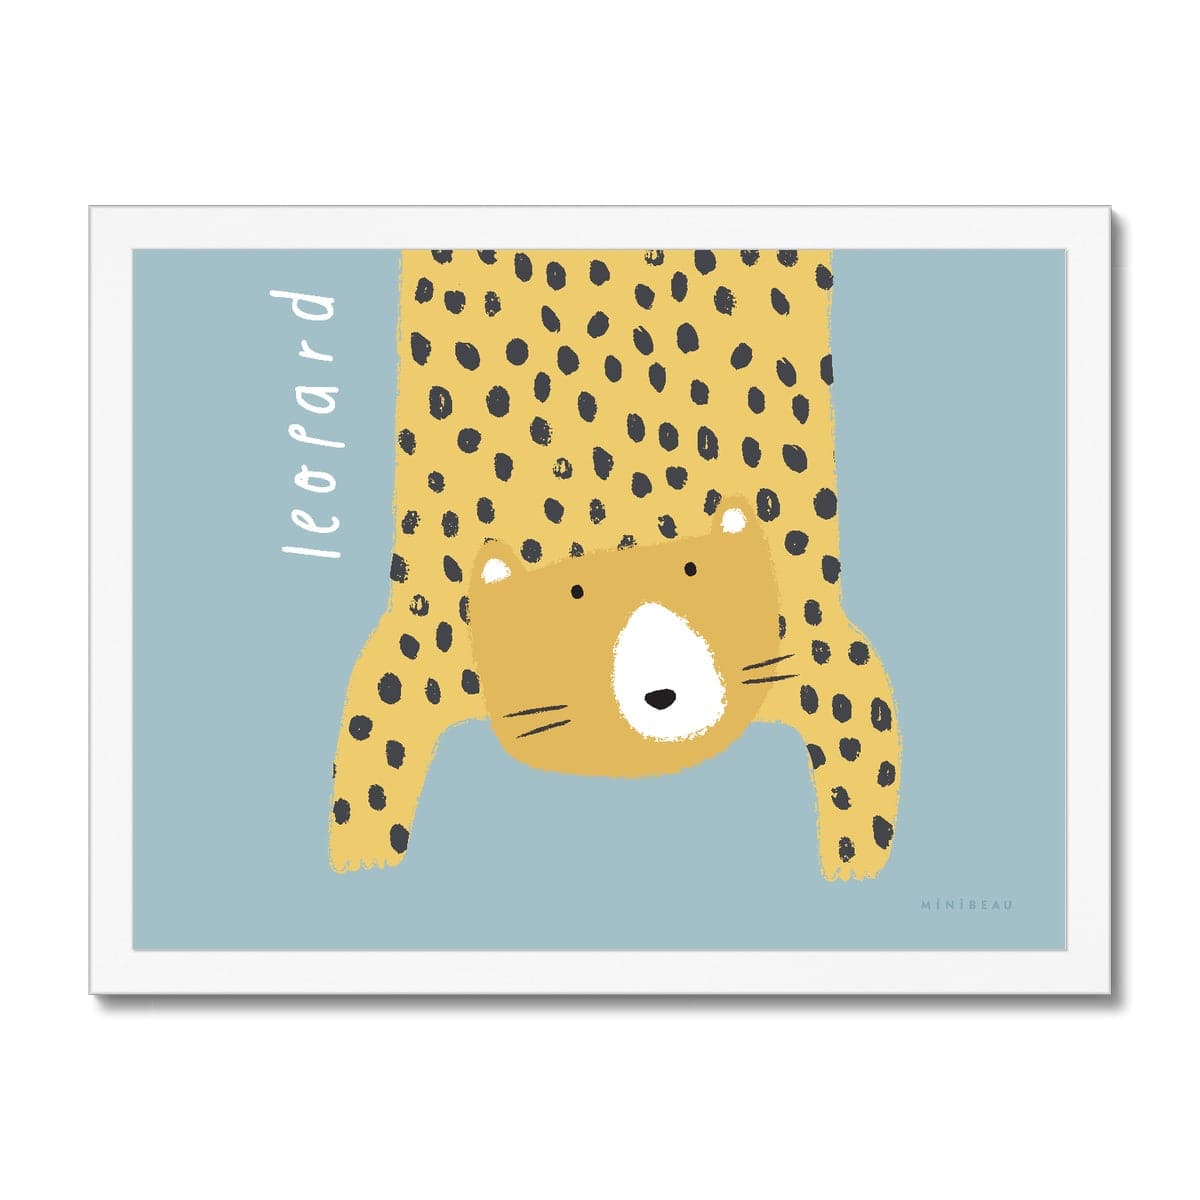 Our Leopard art print shows a hand-drawn leopard hanging down in to the picture, lifting it's head to look out at us on a light blue background, with the word leopard written alongside it, in a white wooden frame.